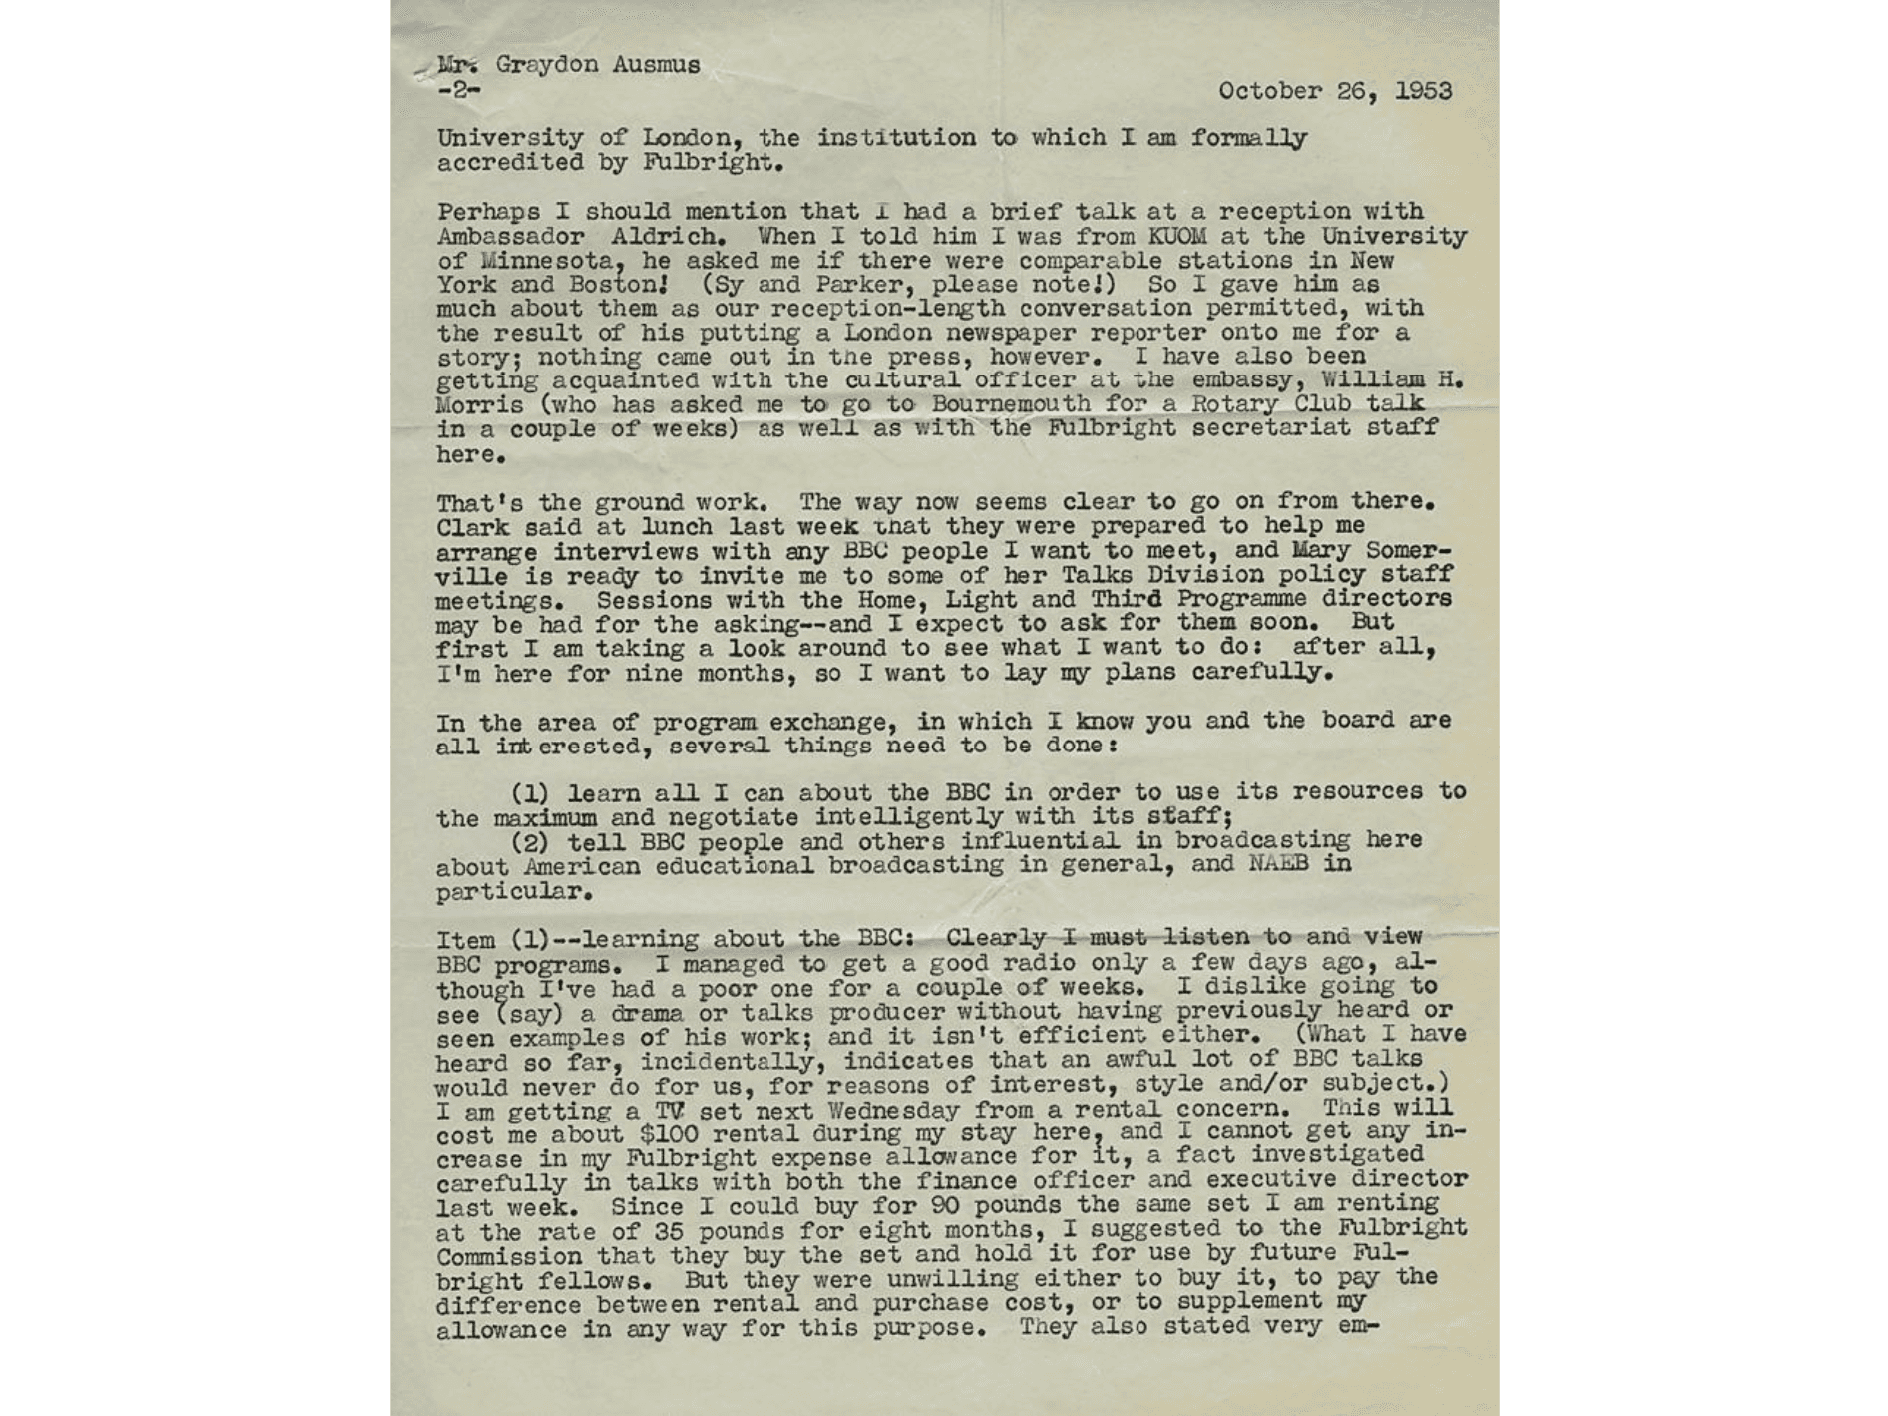 Paulu's developing expertise on international radio, particularly his study of the BBC through several Fulbright grants to travel to Britain and study their system, is also apparent in this documentation.

1950-1960 correspondence and publications of Burton Paulu (collection #1).

<https://www.unlockingtheairwaves.org/document/naeb-b070-f03/#161>